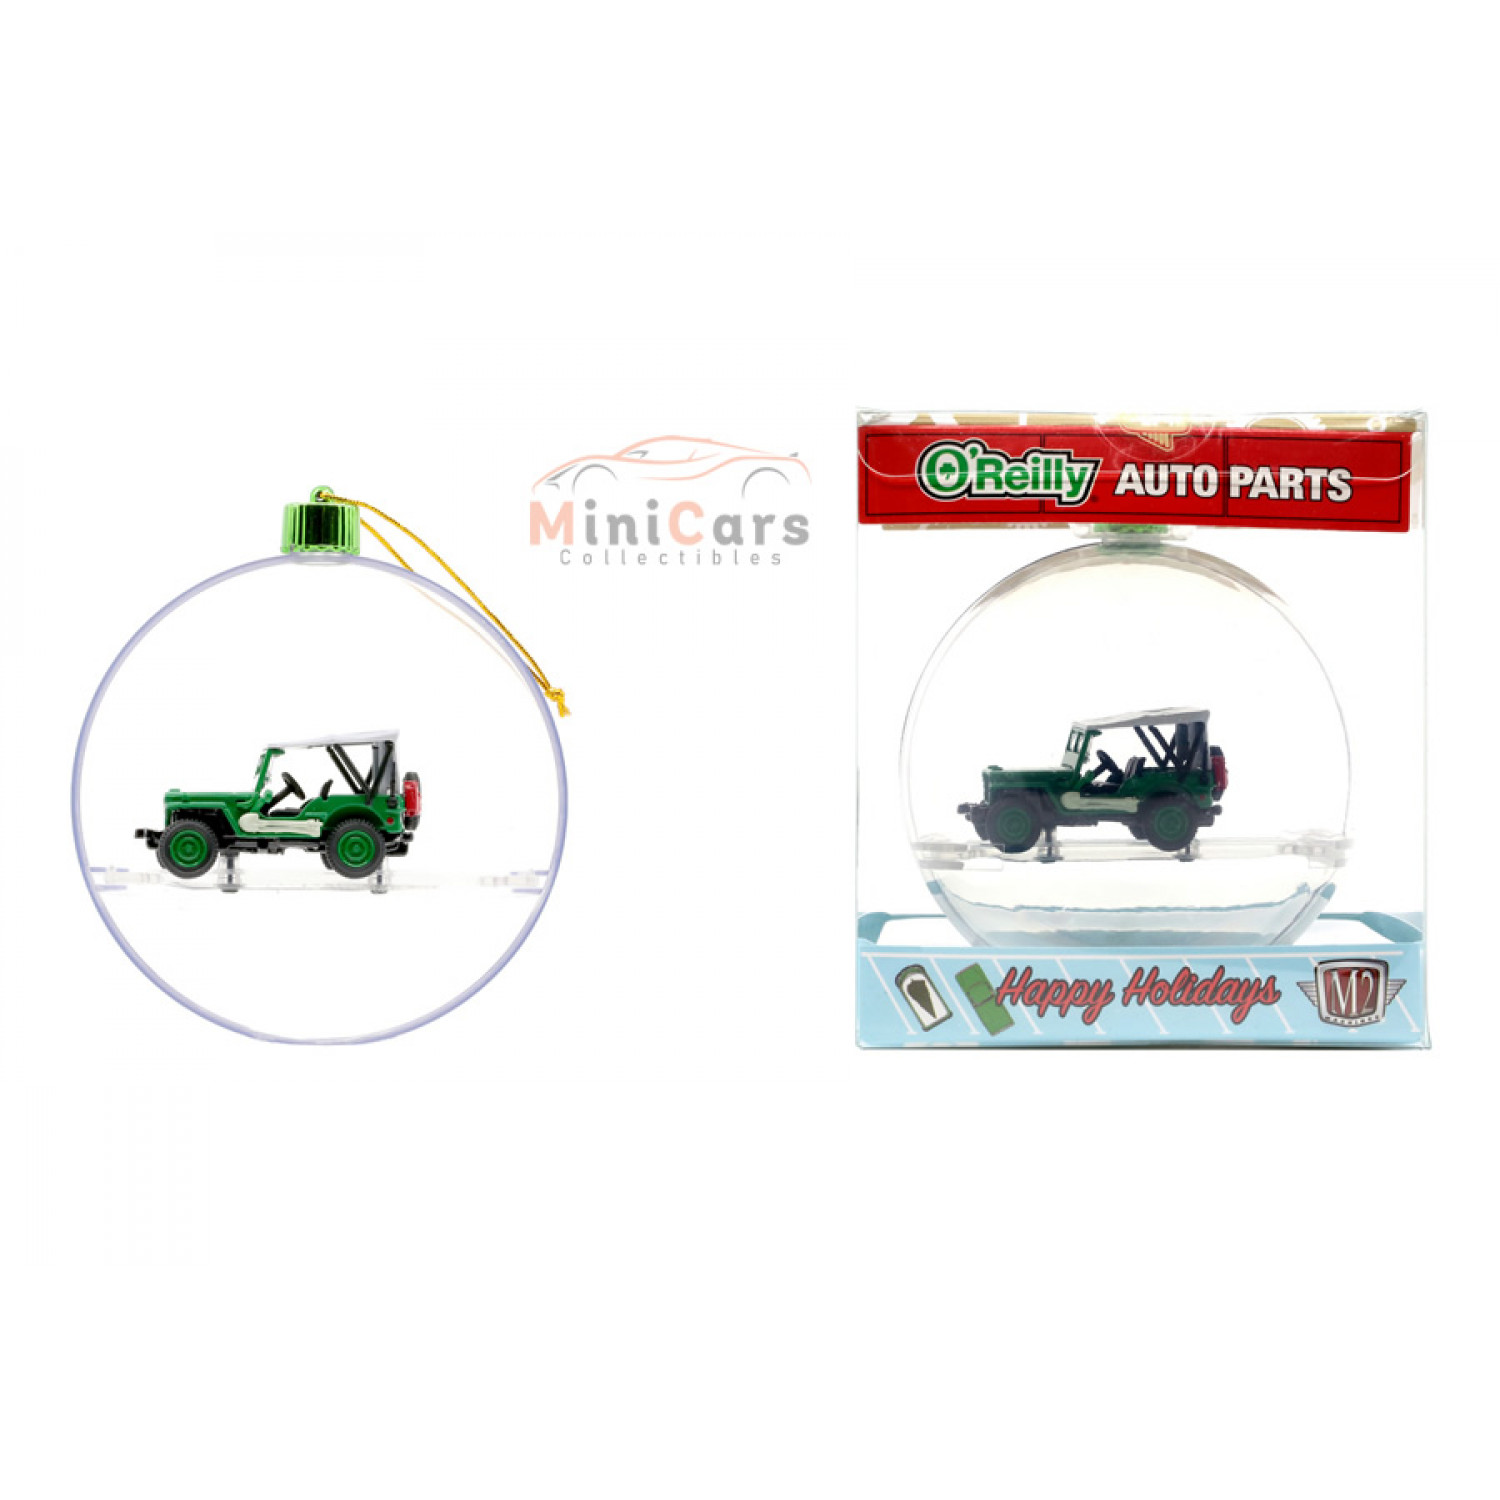 1944 Willys MB Jeep Ornaments 2022 Exclusive Oreilly